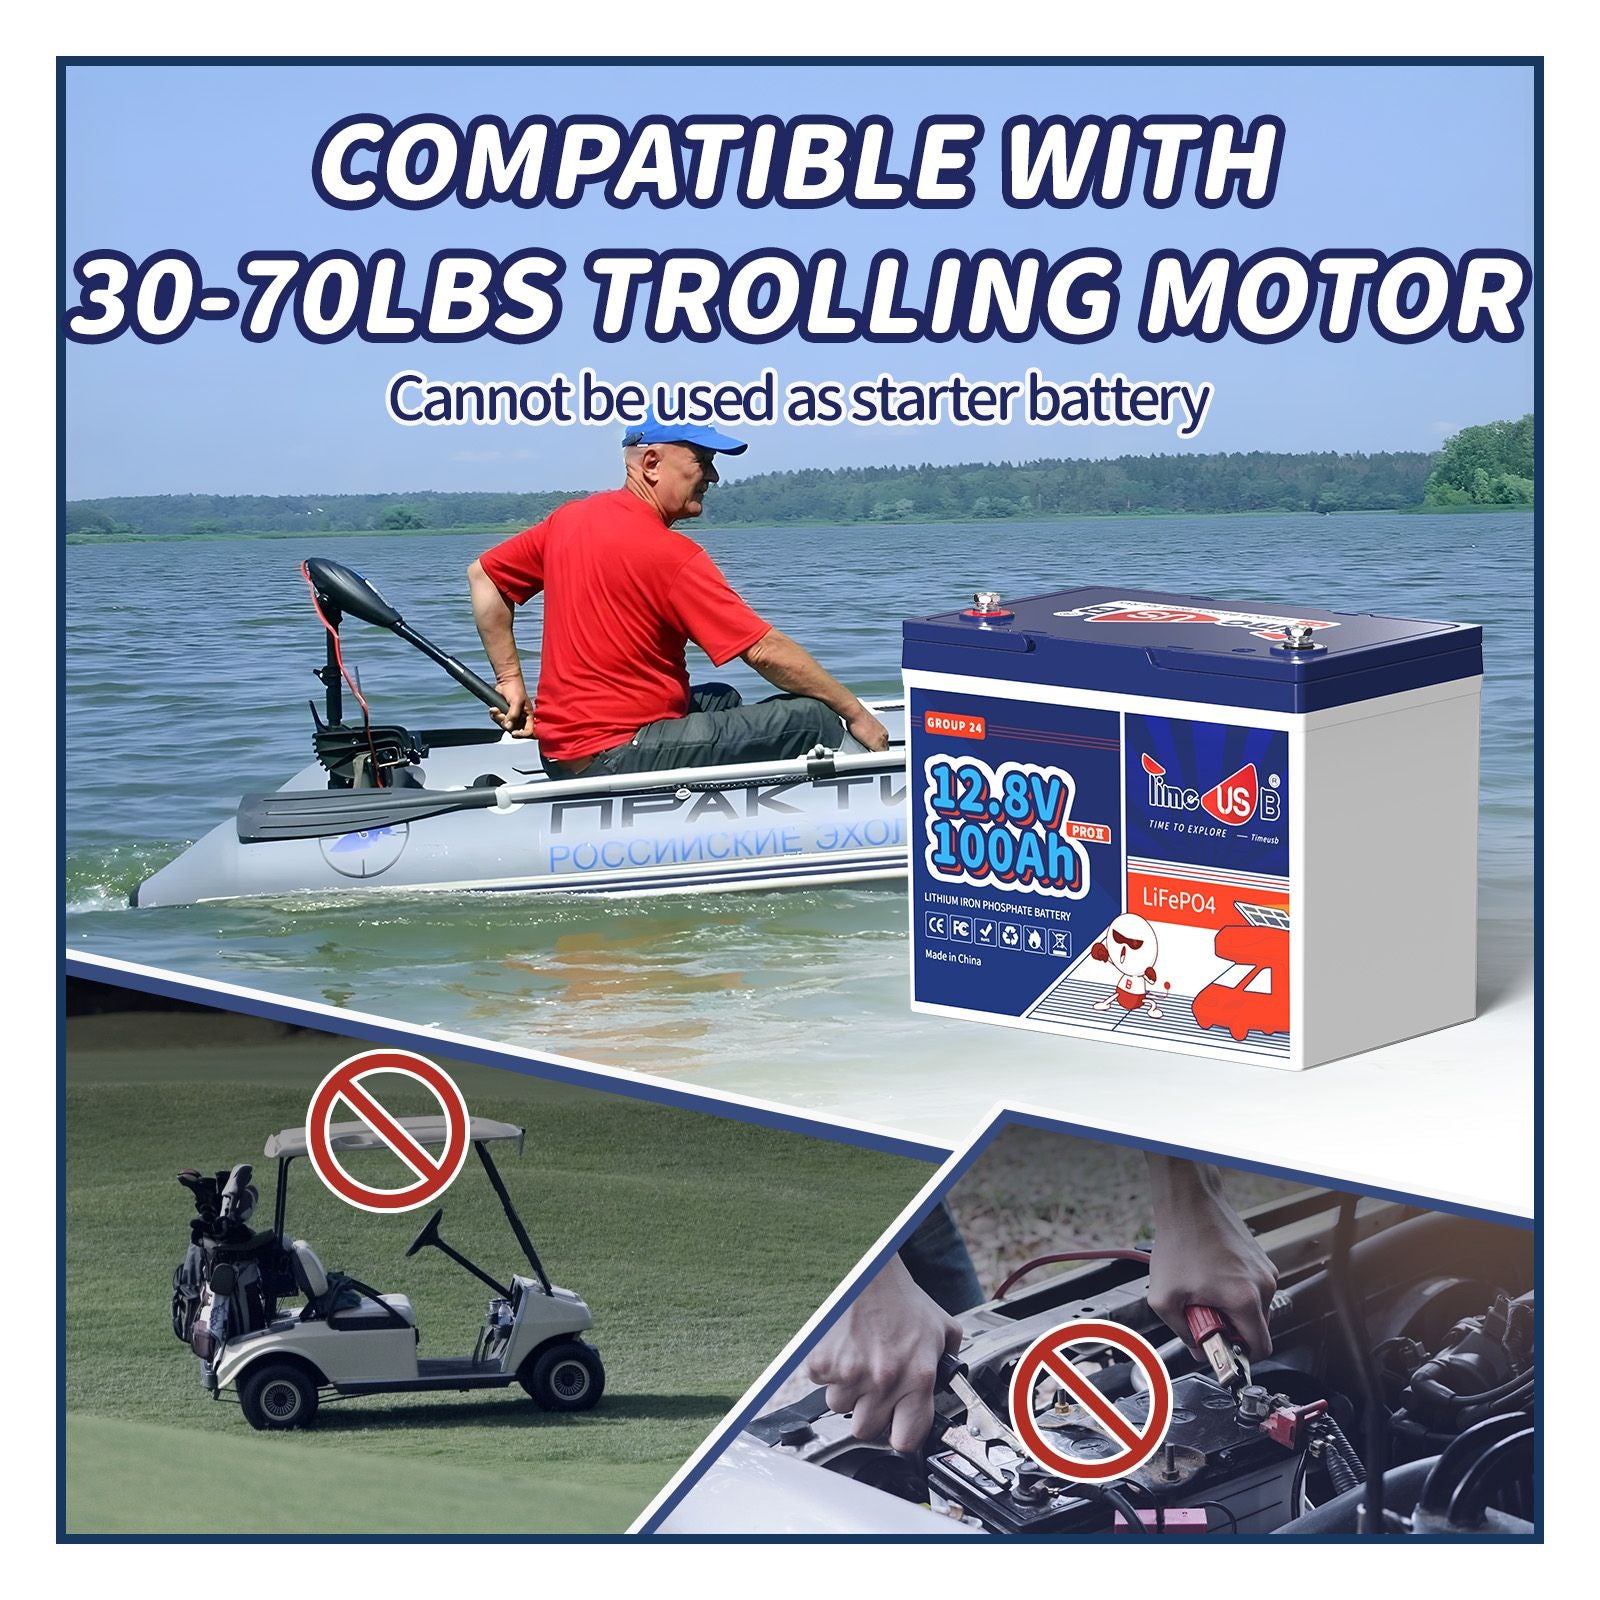 Timeusb Lithium Group 24 Battery Trolling Motor